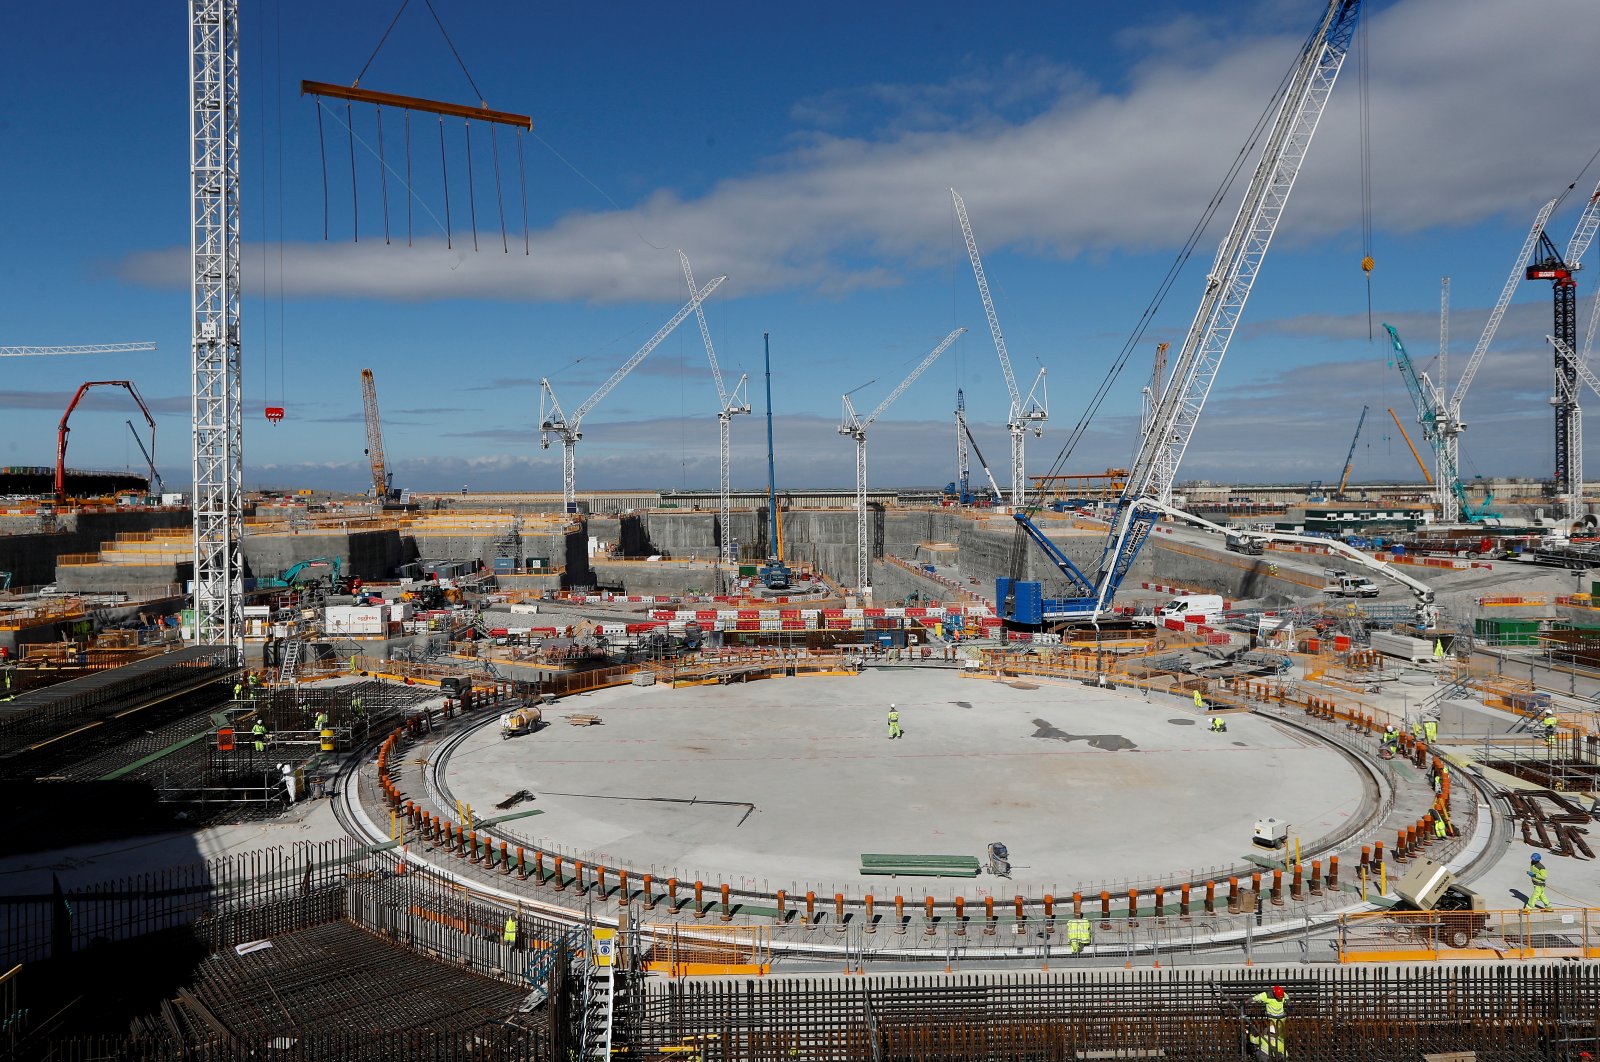 Workers at the nuclear reactor area under construction, are seen at Hinkley Point C nuclear power station site, near Bridgwater, Britain, September 12, 2019. (Reuters Photo)